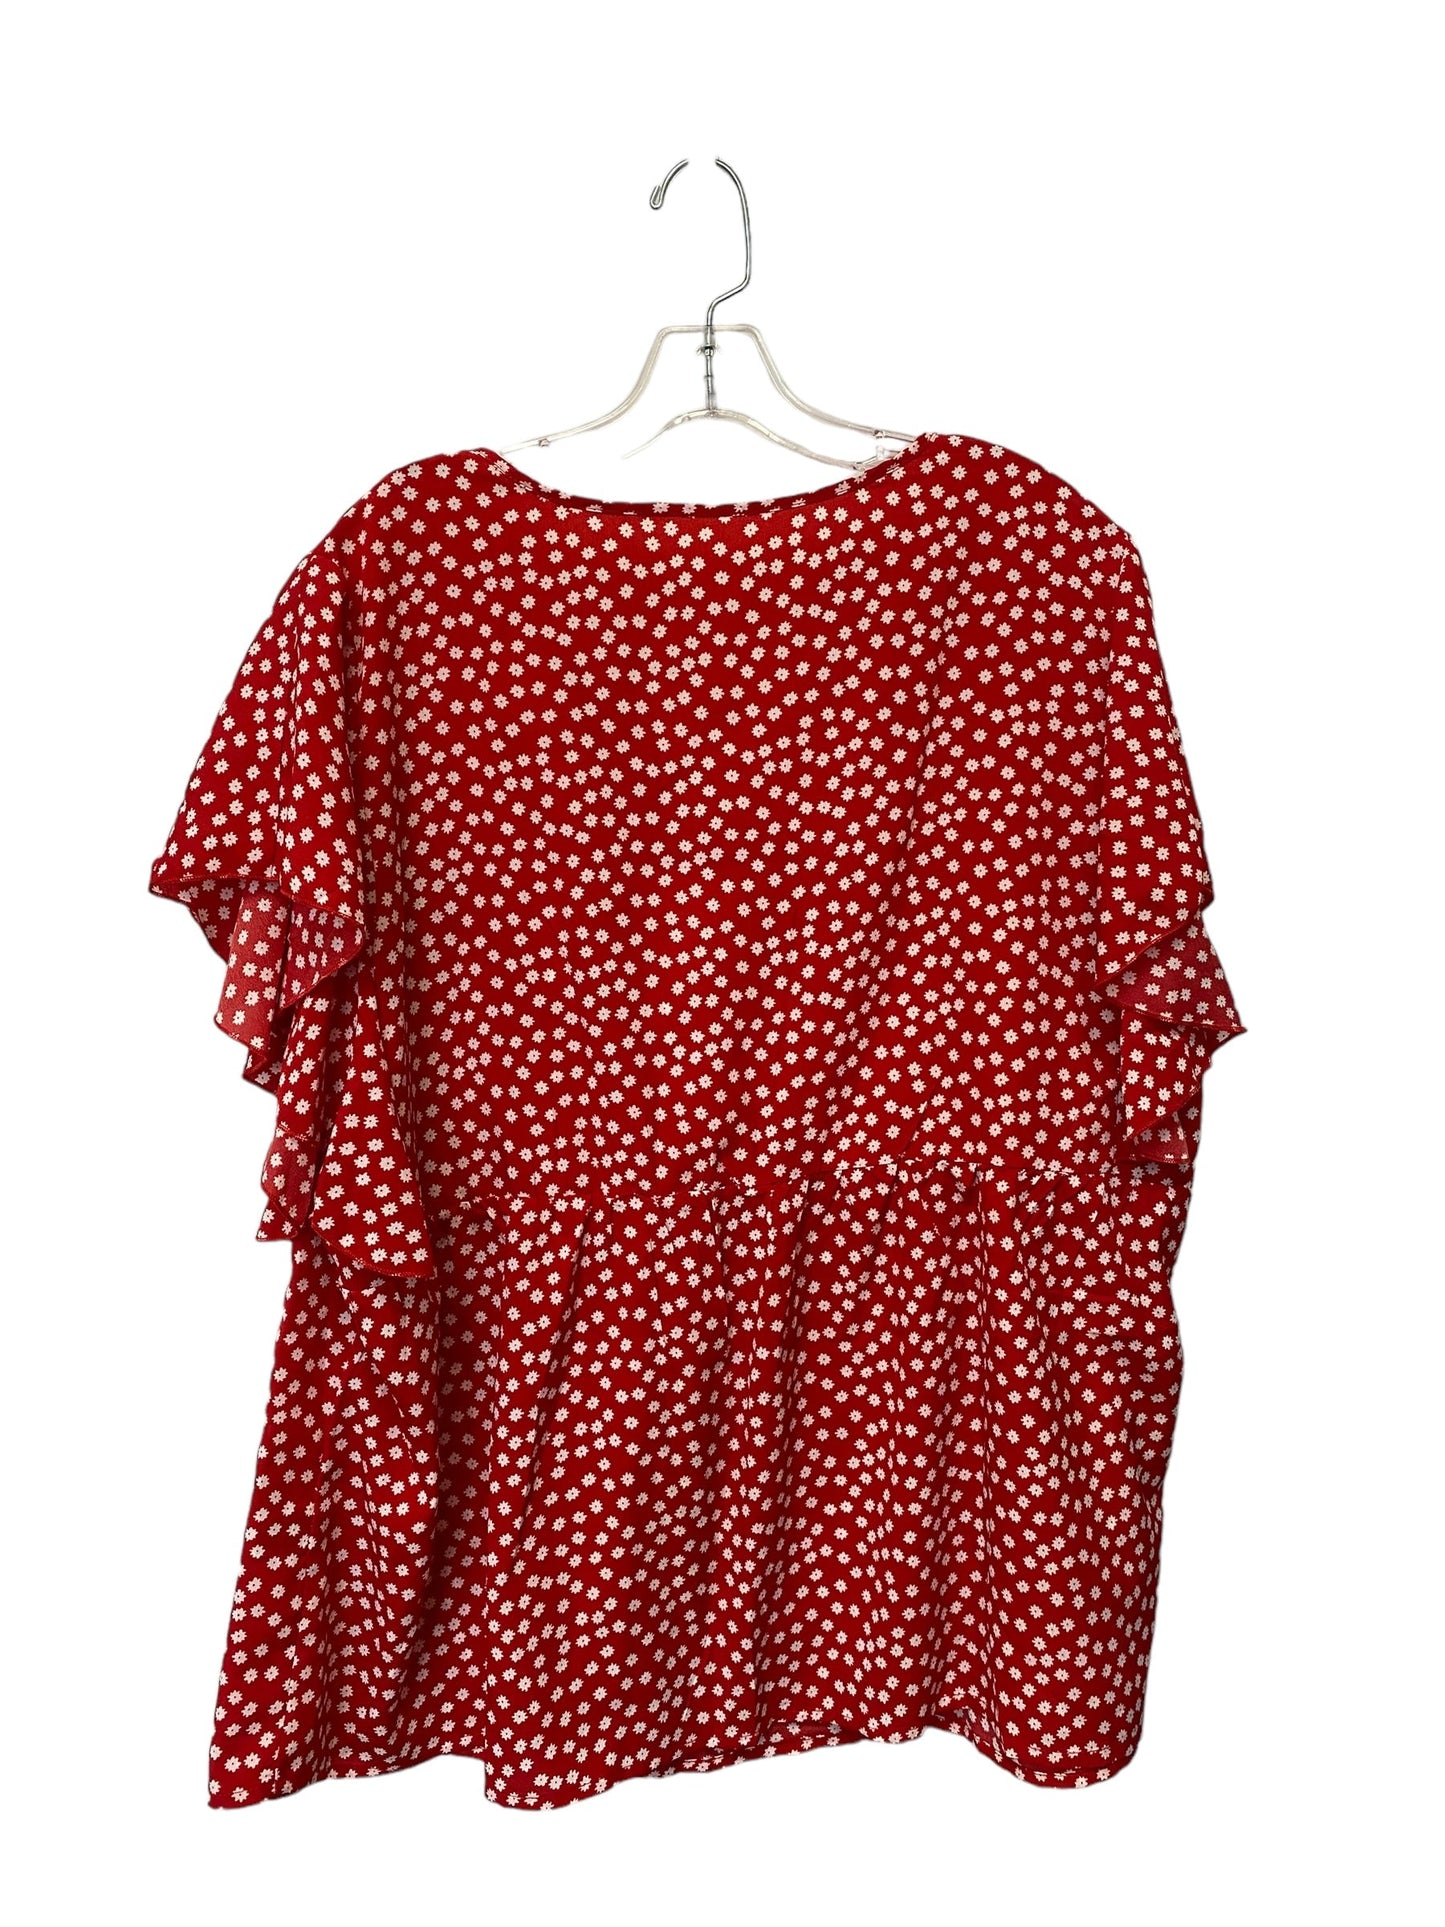 Red Top Short Sleeve Shein, Size 5